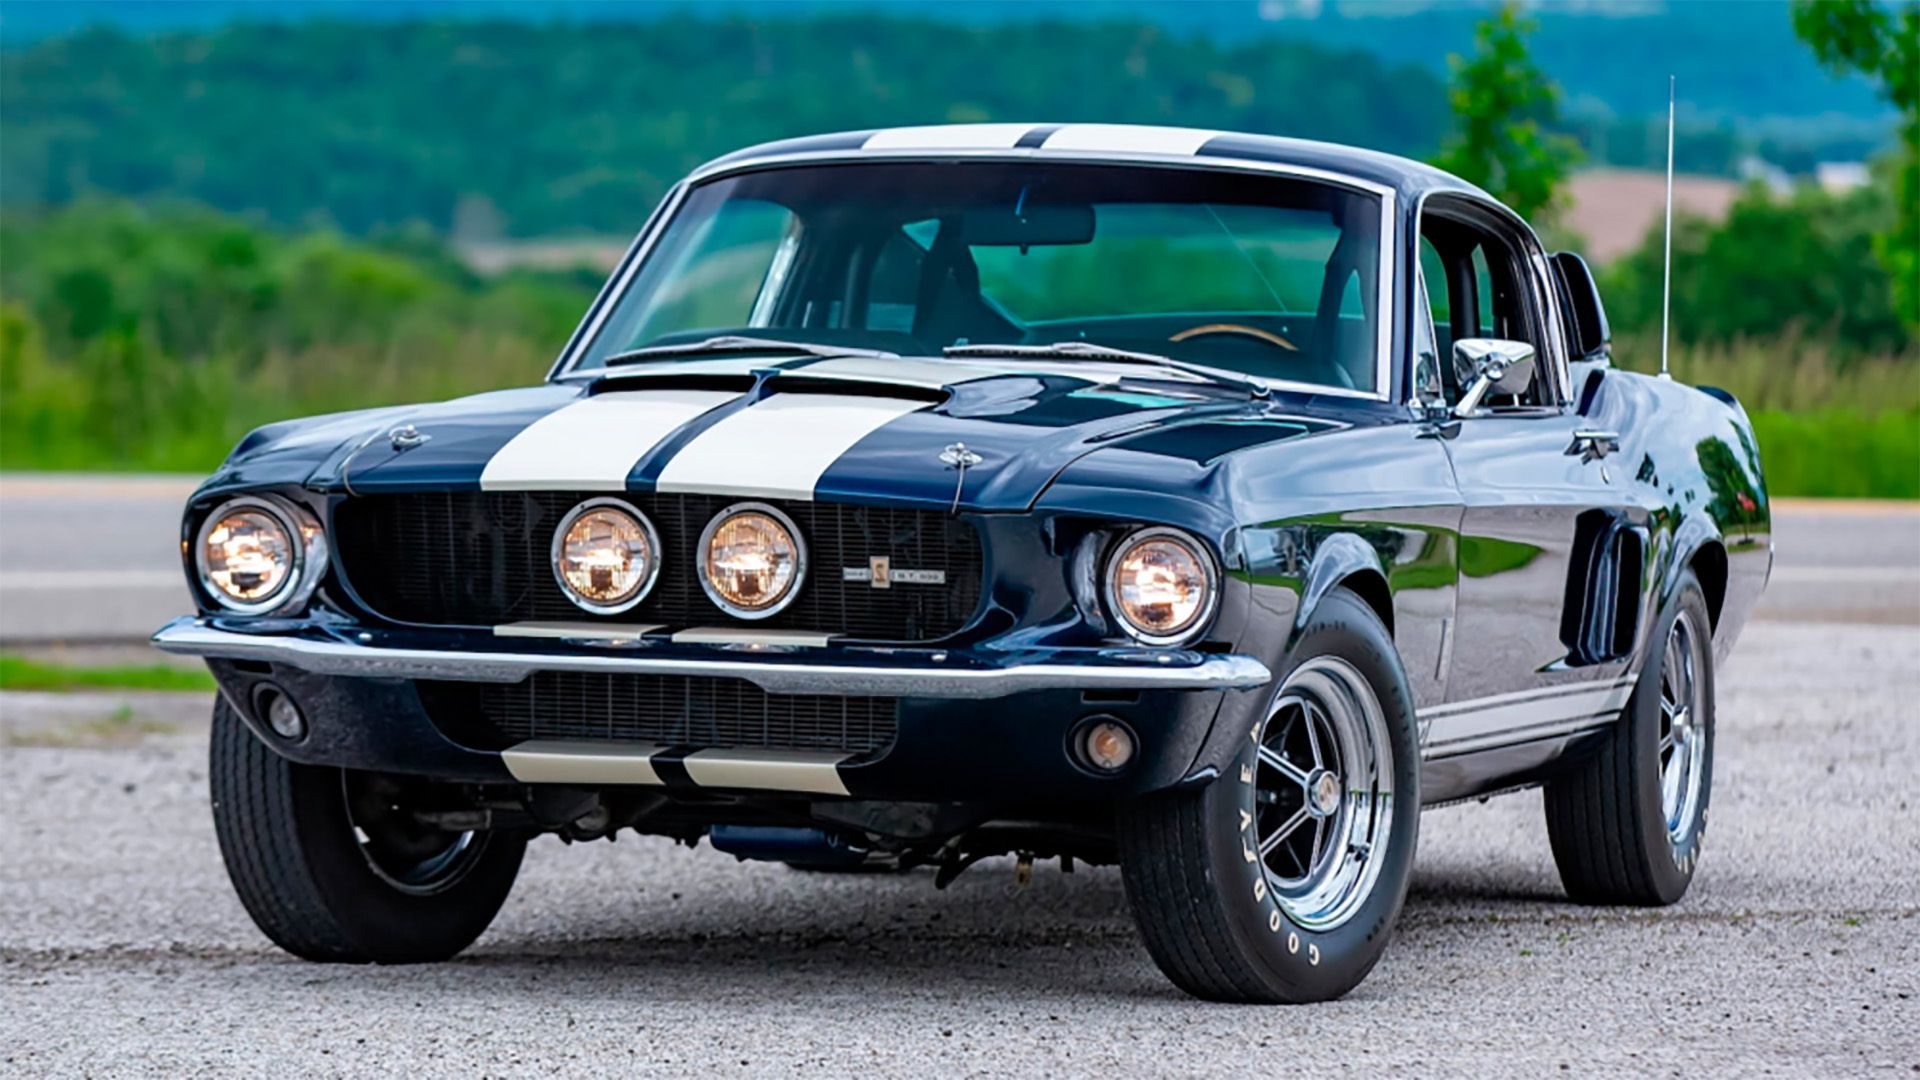 10 Reasons Why The 1967 Ford Mustang Shelby GT500 Is The Ultimate ...